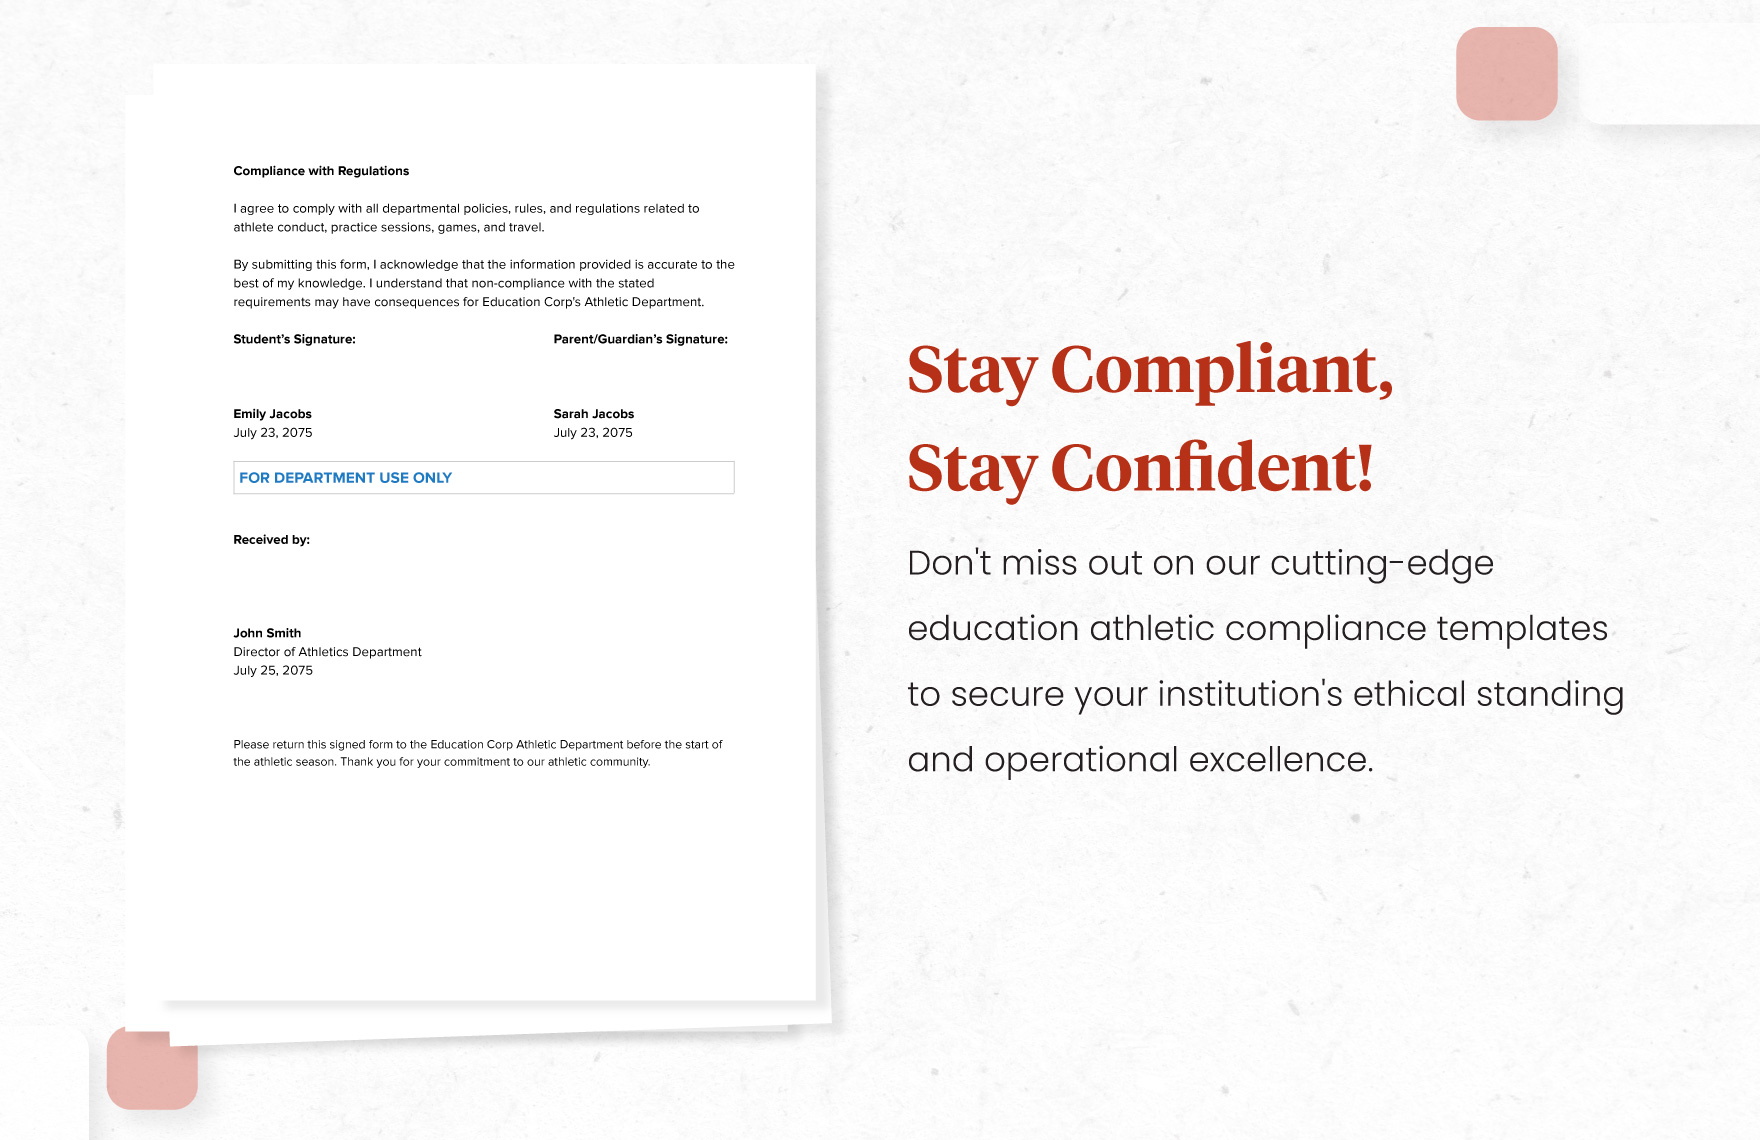 School Athletic Department Compliance Form Template